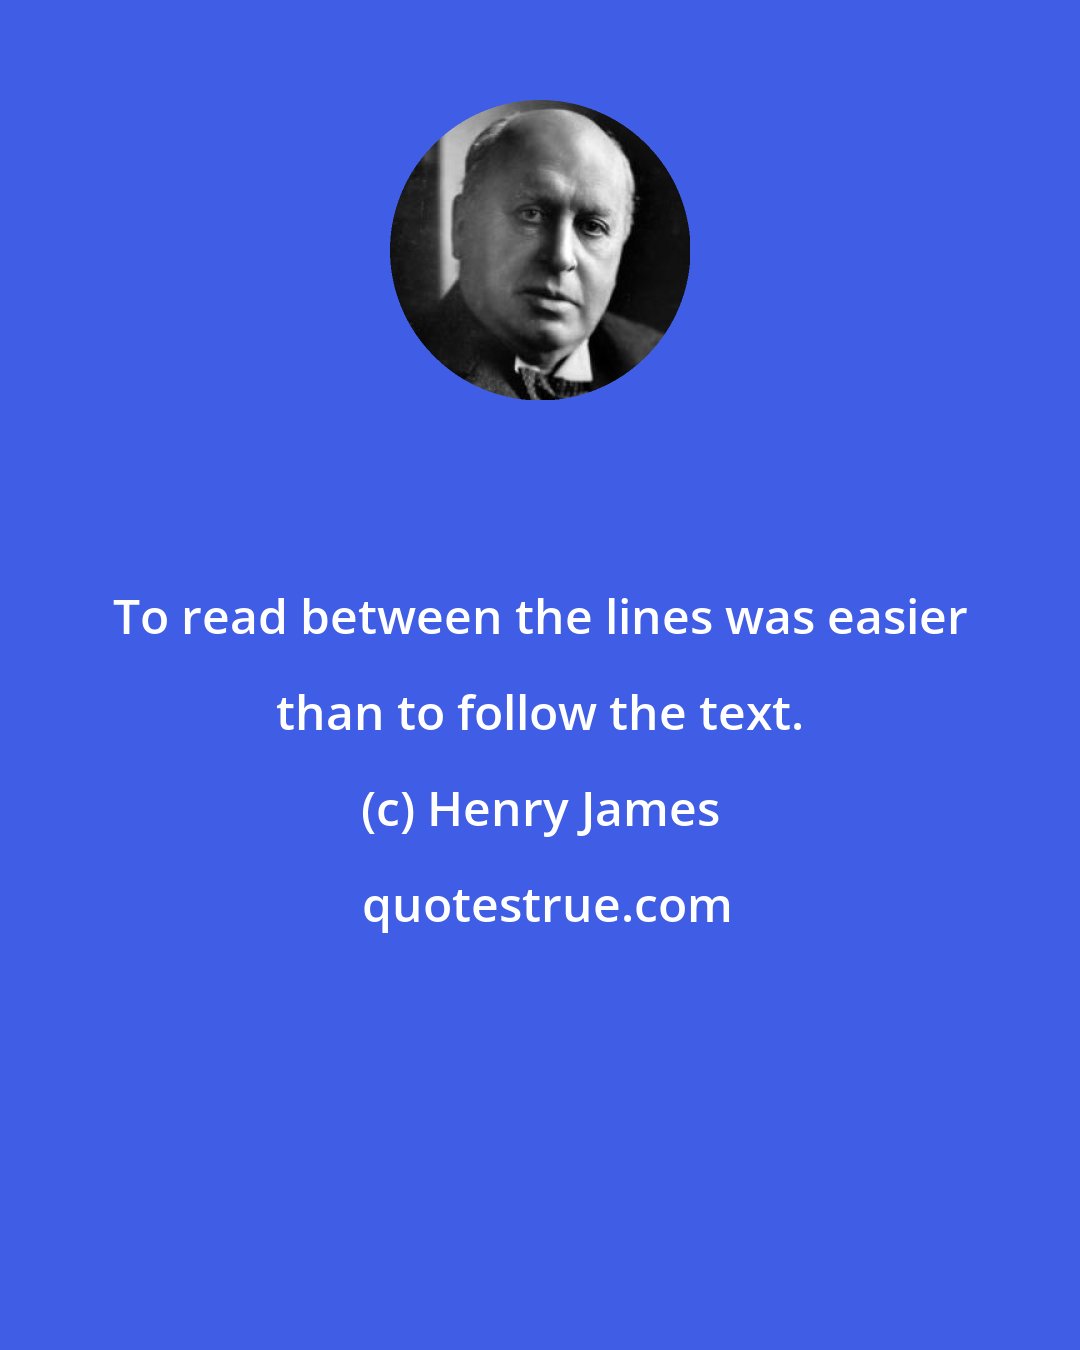 Henry James: To read between the lines was easier than to follow the text.